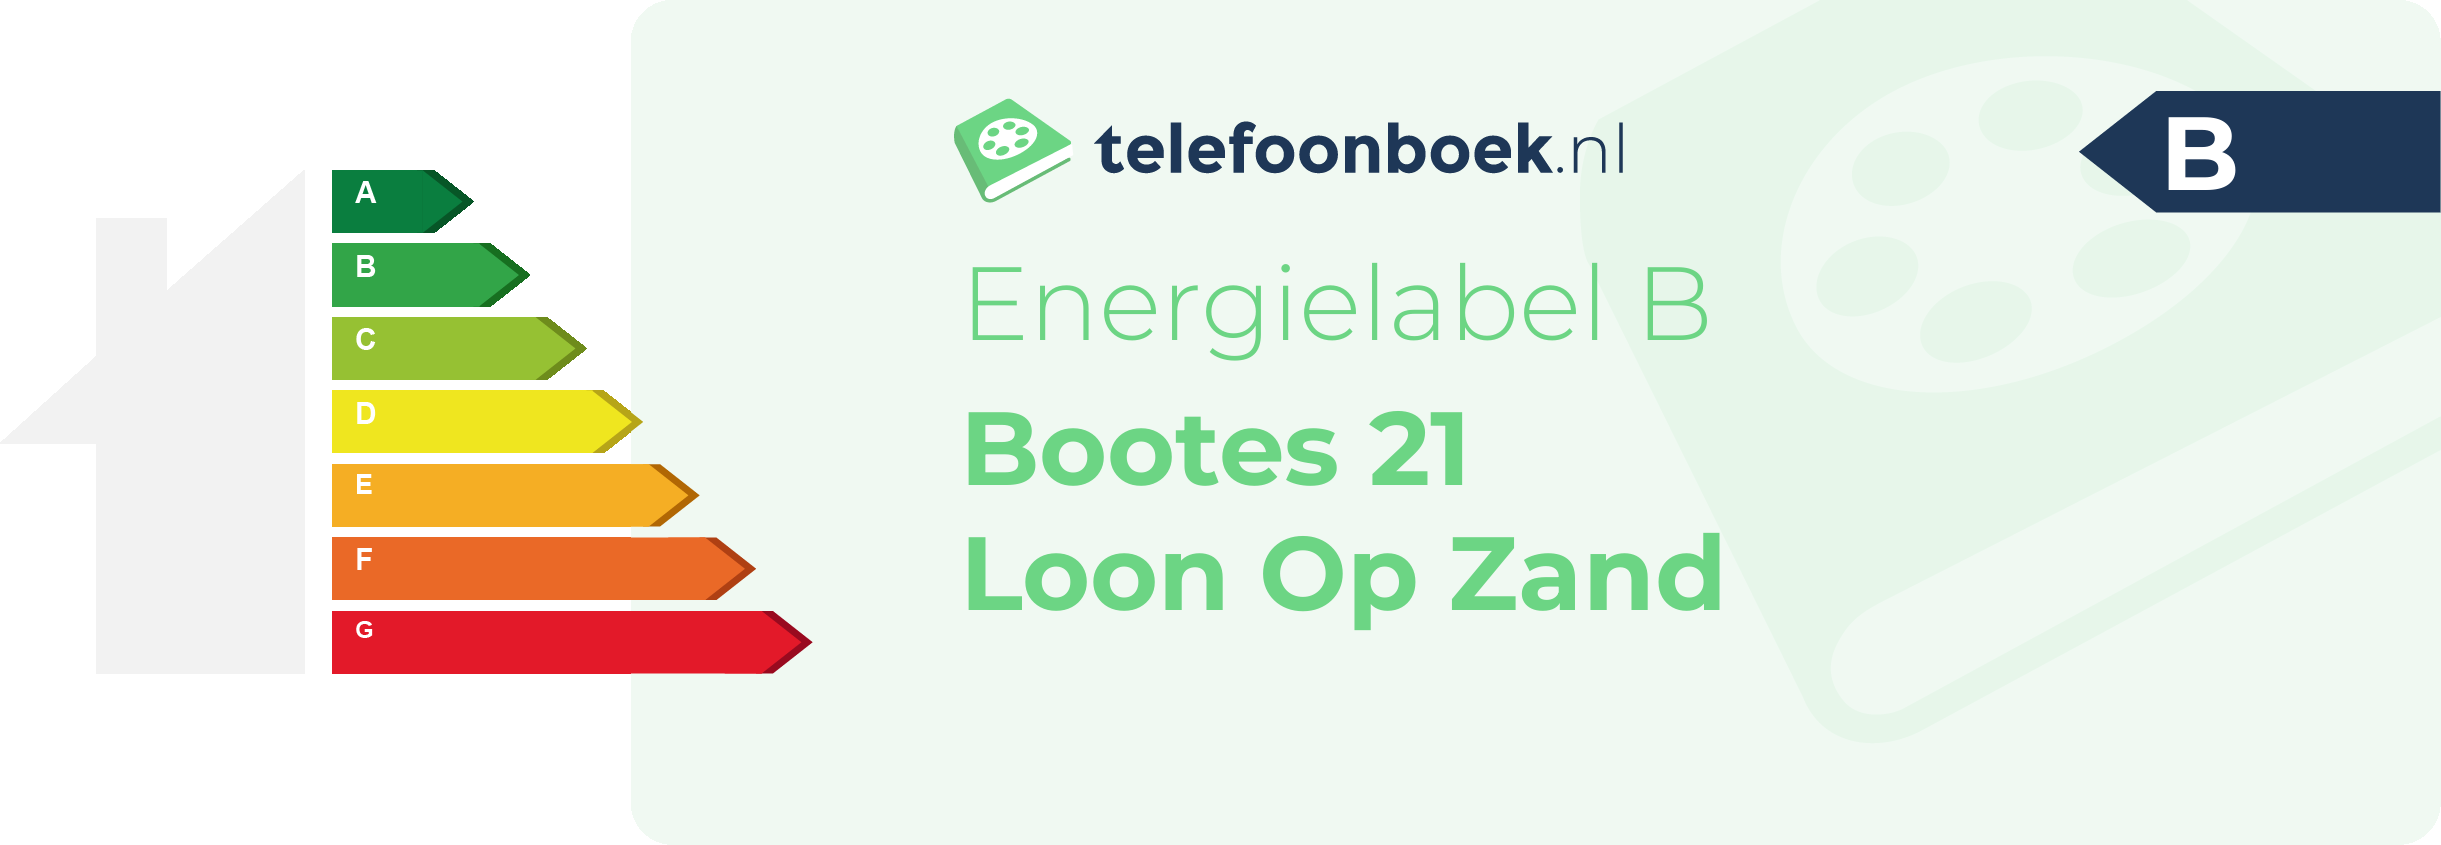 Energielabel Bootes 21 Loon Op Zand